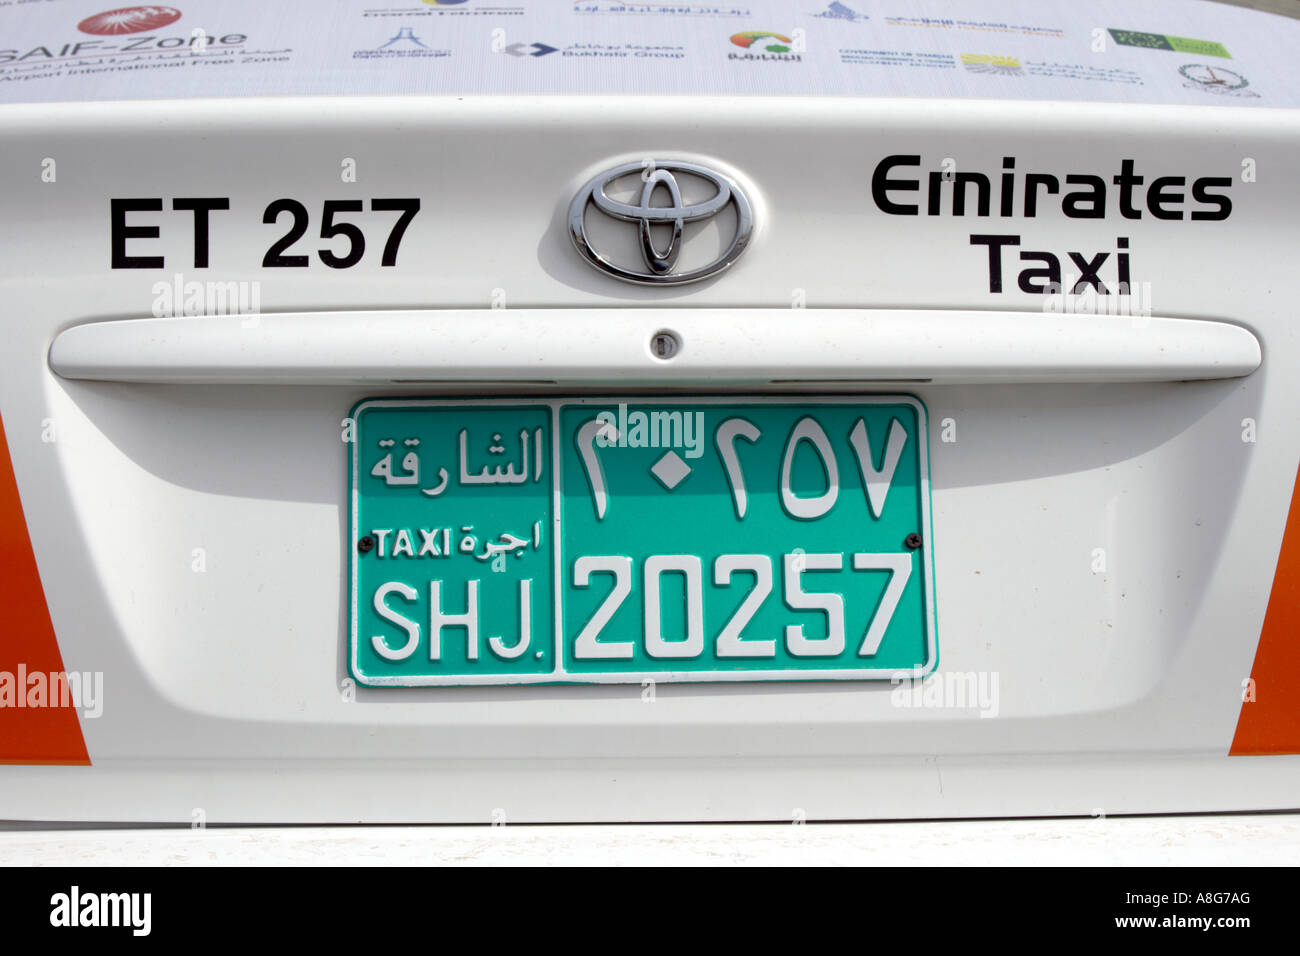 Toyota Emirates Taxi, car with Sharjah car license plate, United Arab  Emirates. Photo by Willy Matheisl Stock Photo - Alamy